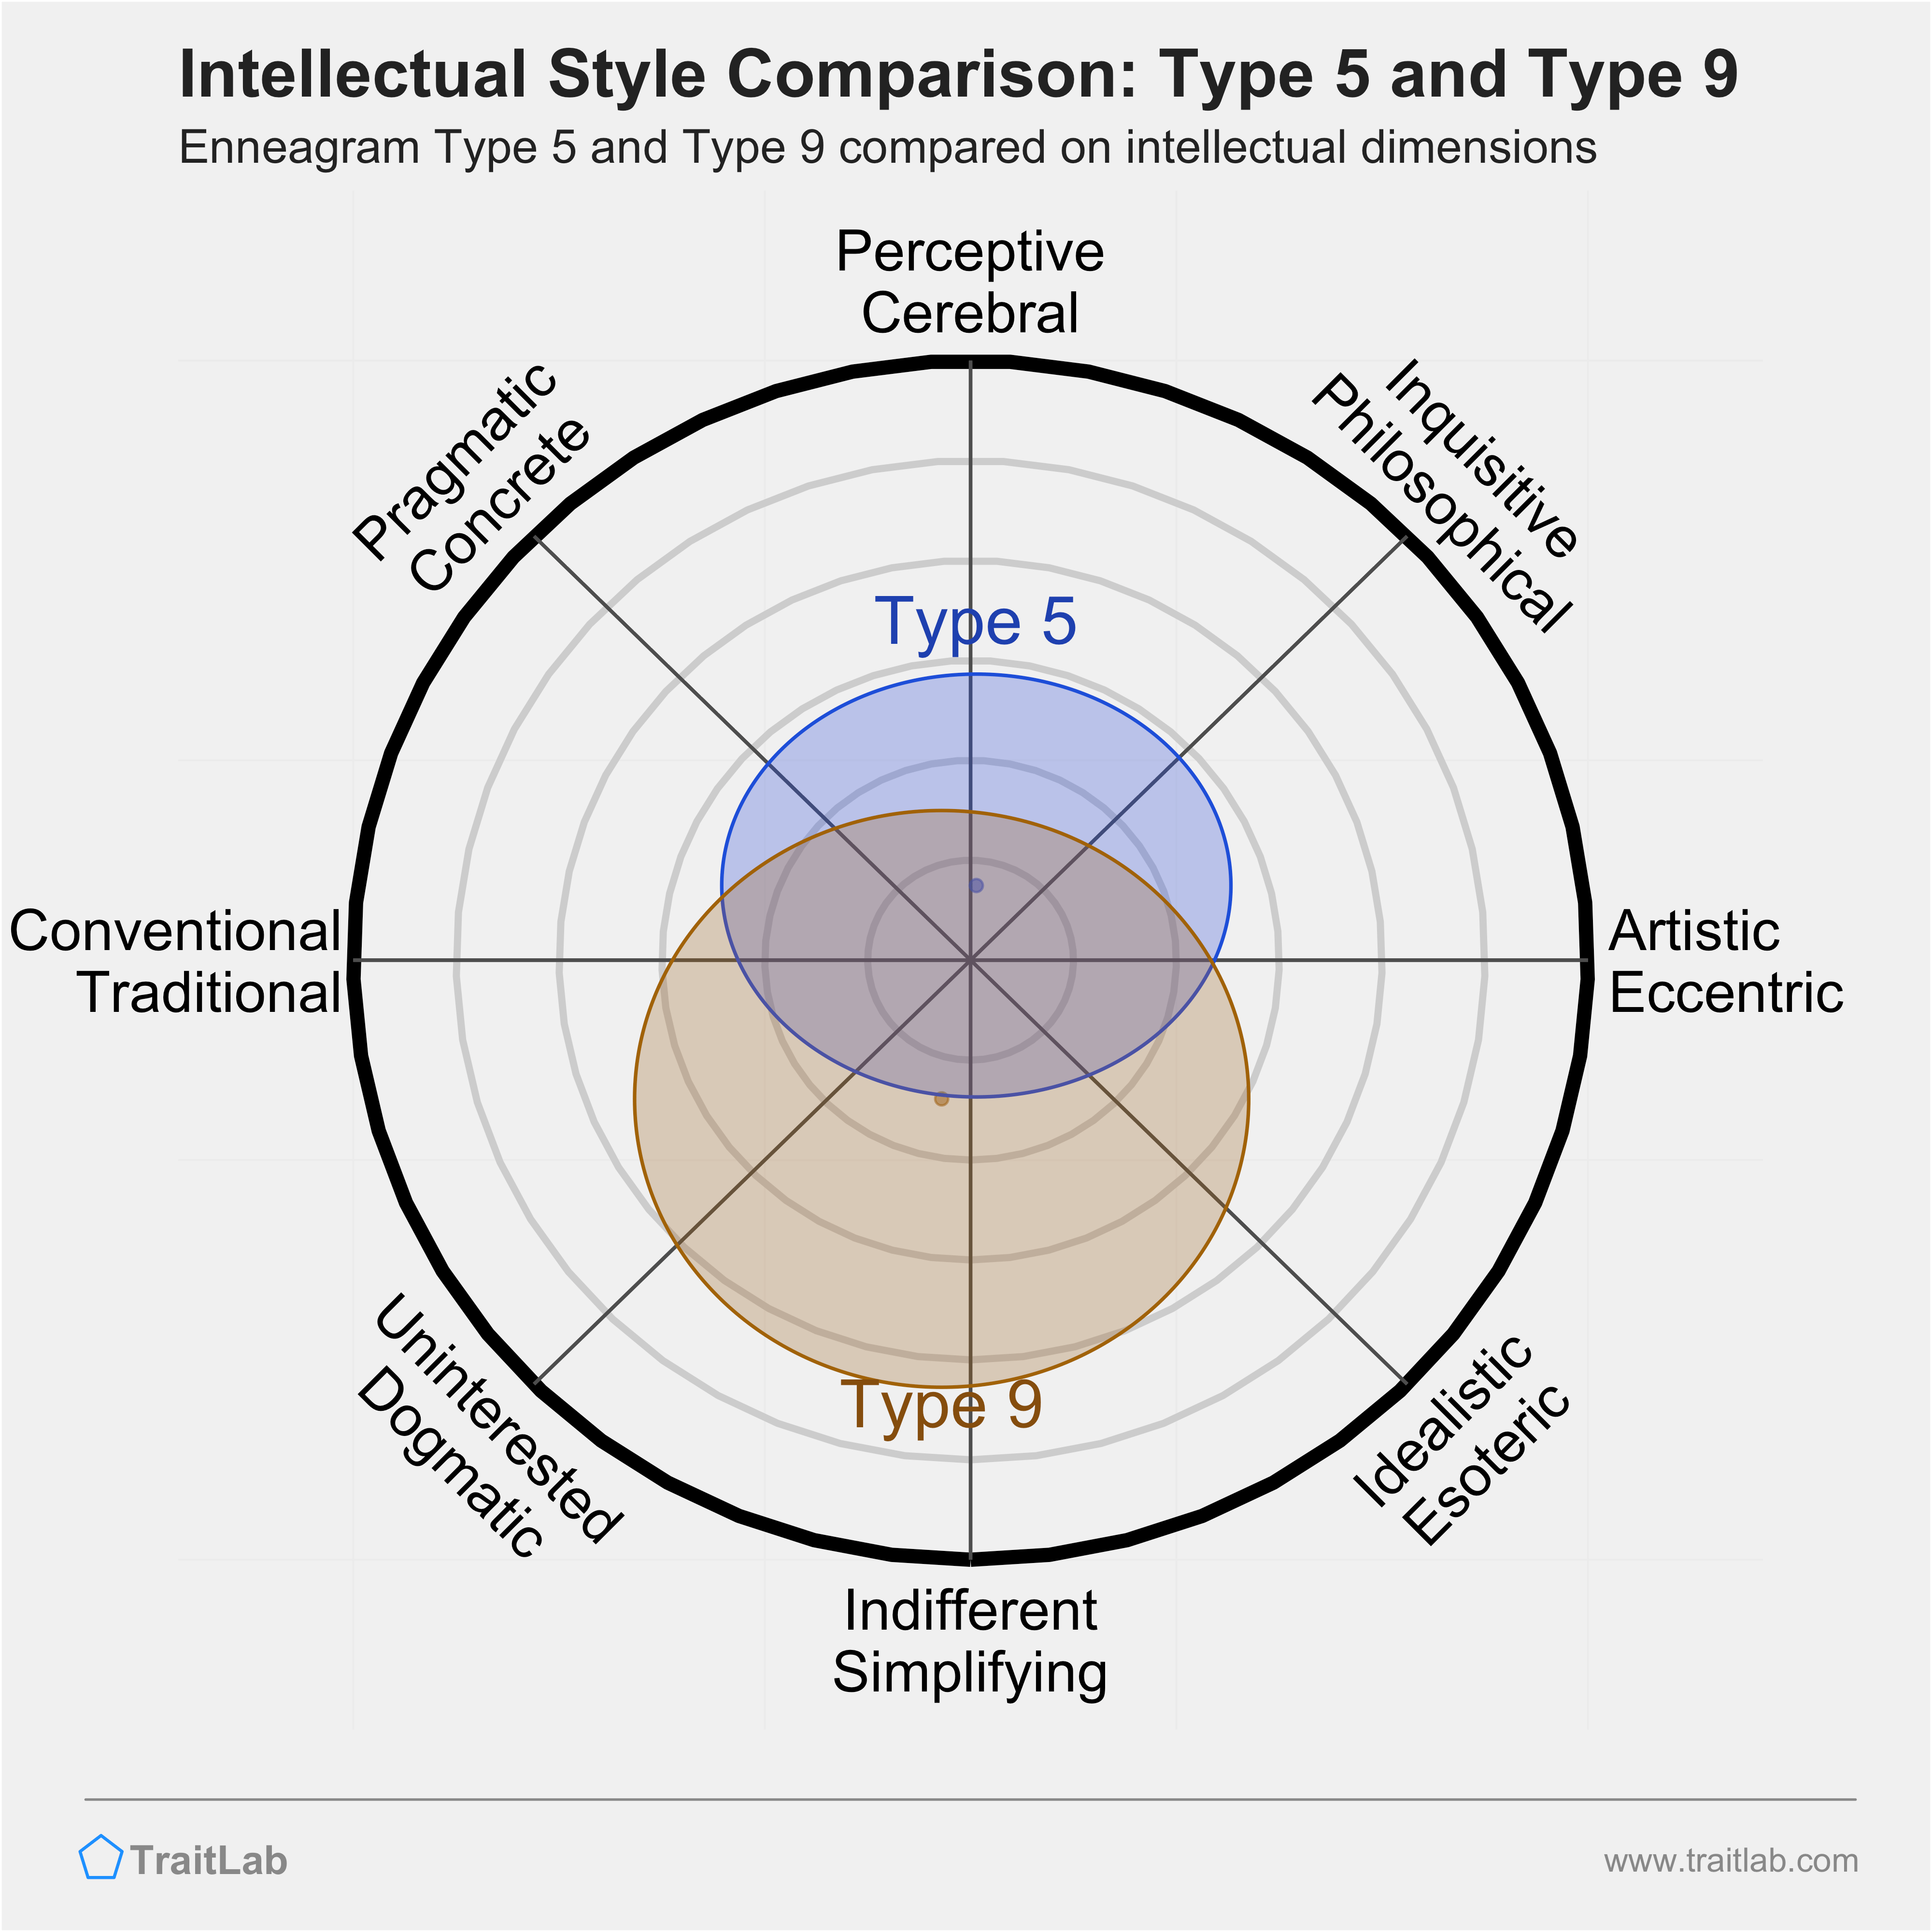 Type 5 and Type 9 comparison across intellectual dimensions